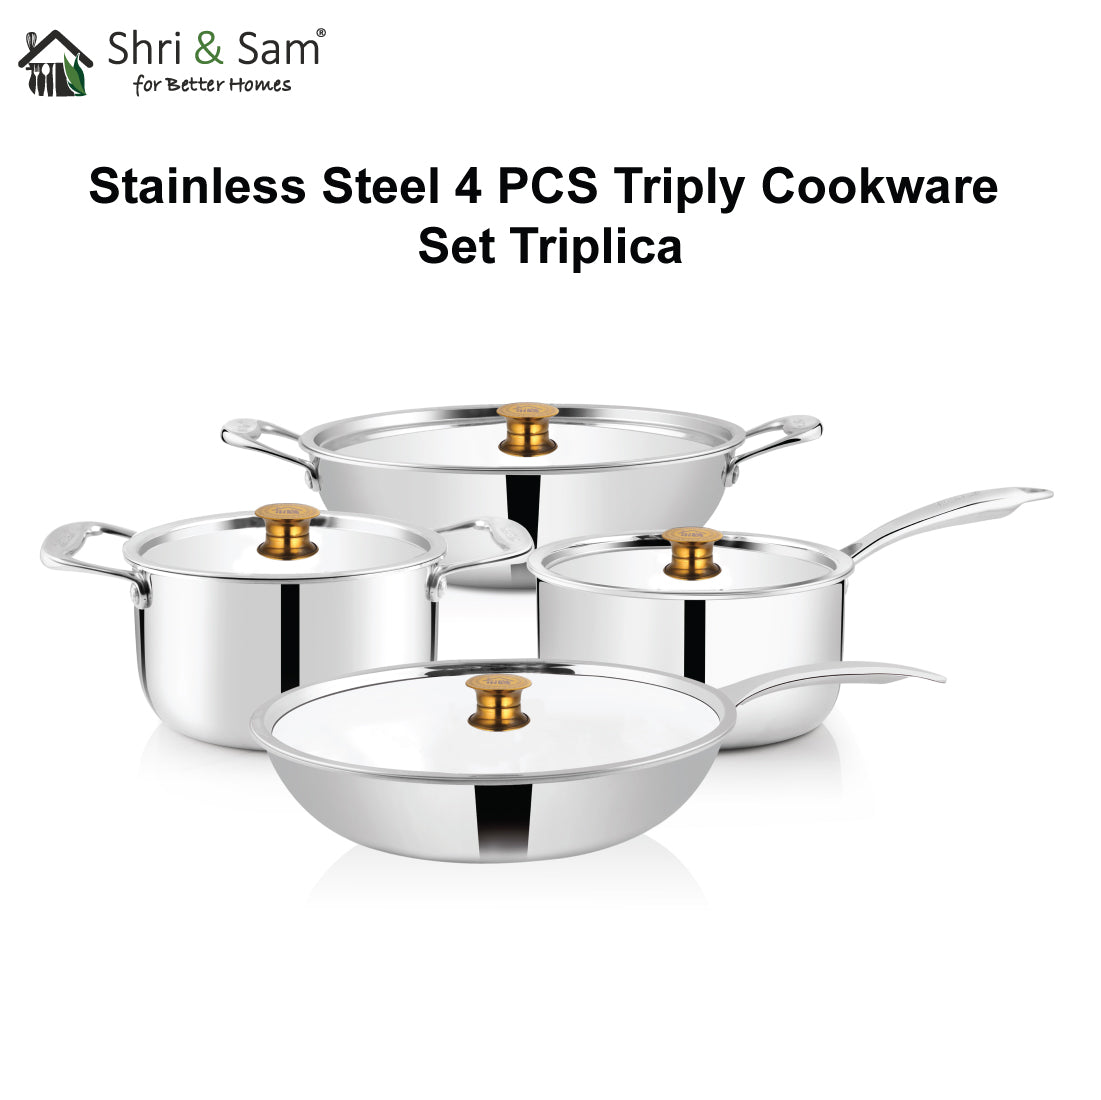 Stainless Steel 4 PCS Triply Cookware Set Triplica